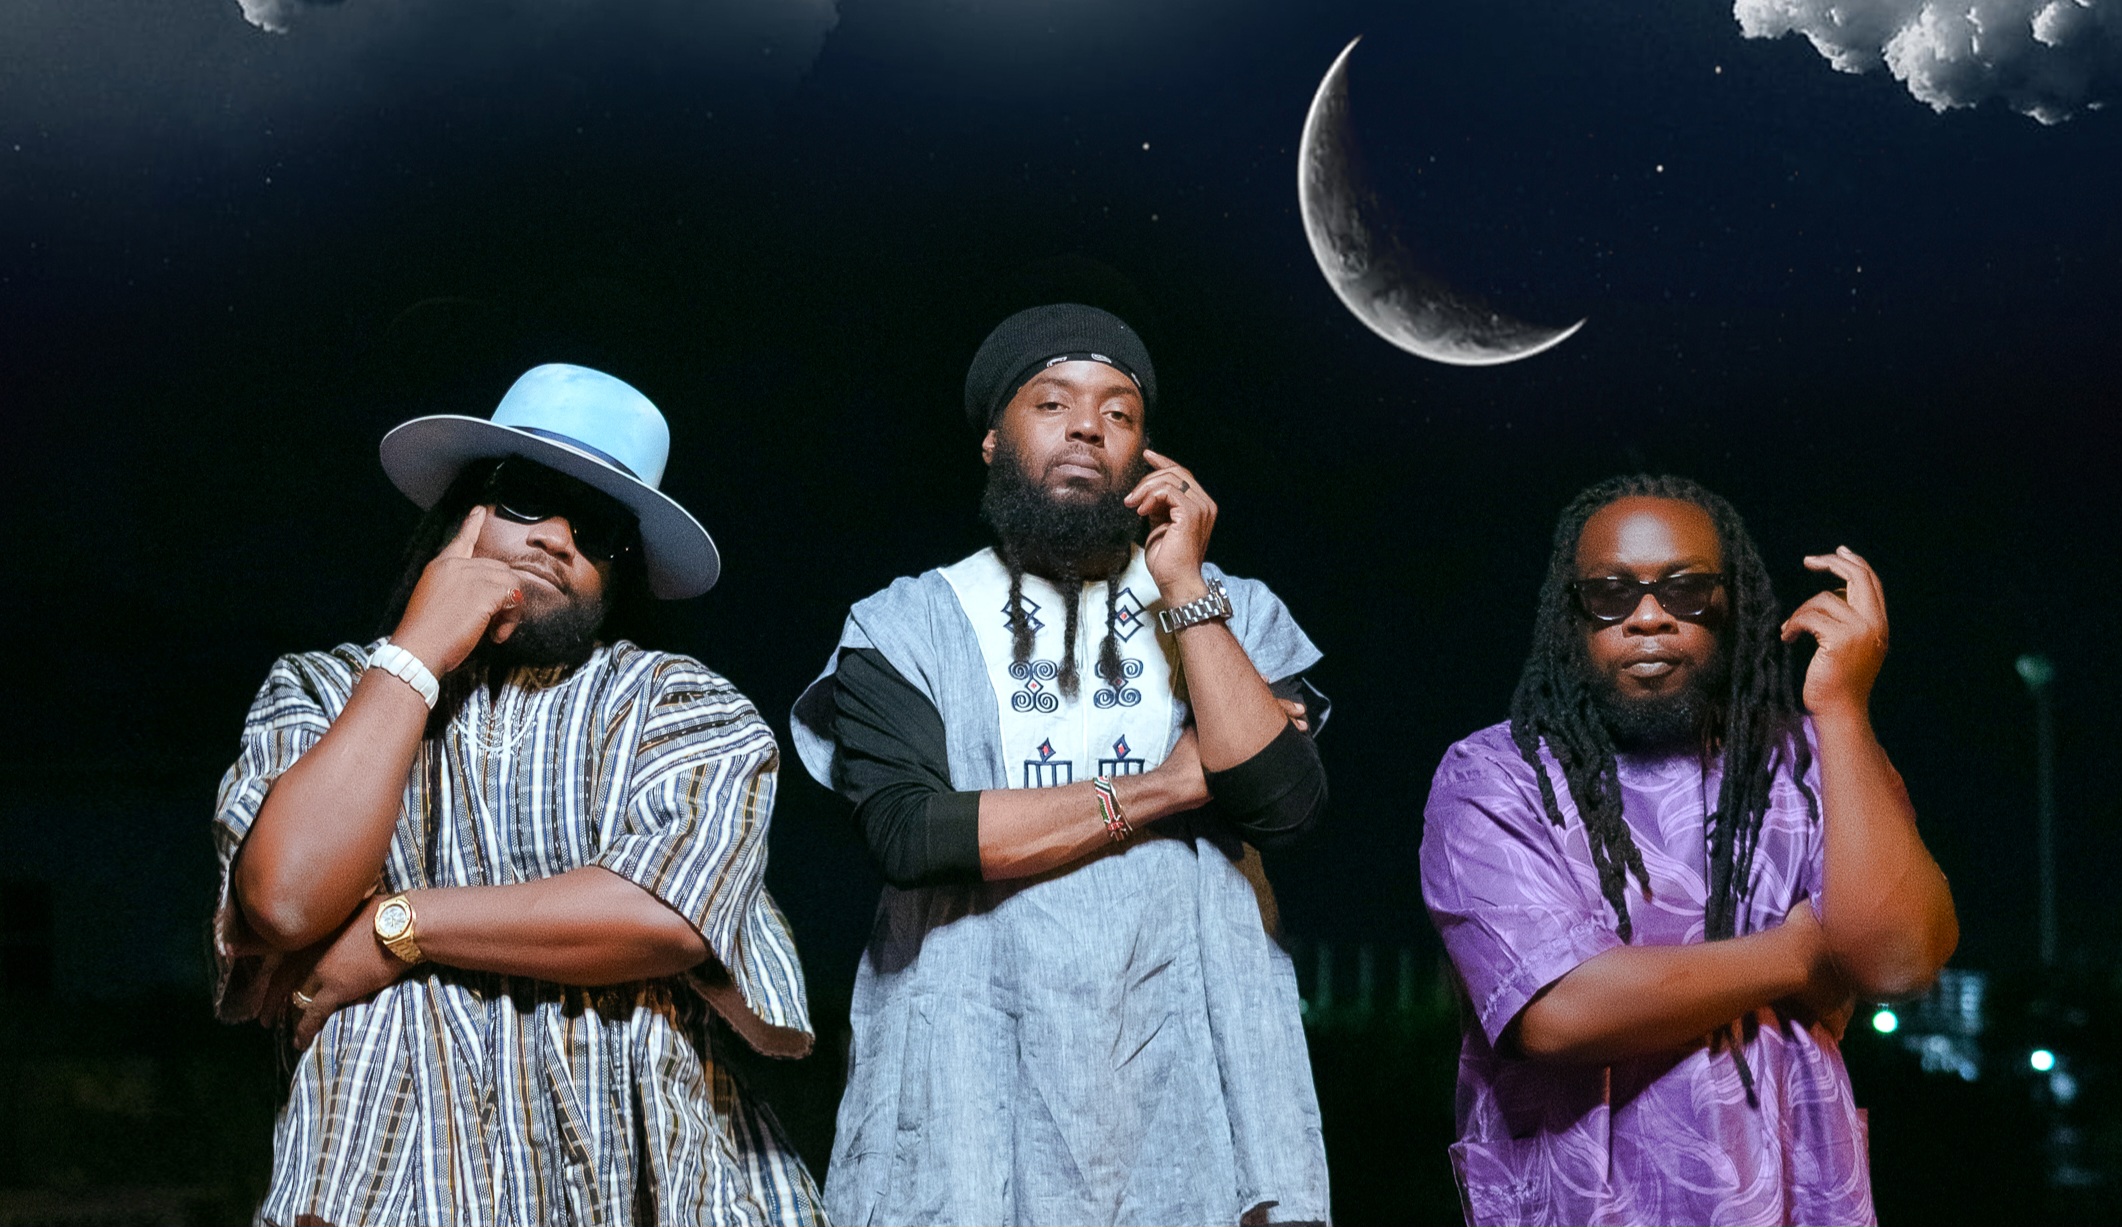 Reggae Icons Morgan Heritage Spark Conversation With Latest Single “JUST A NUMBER”.